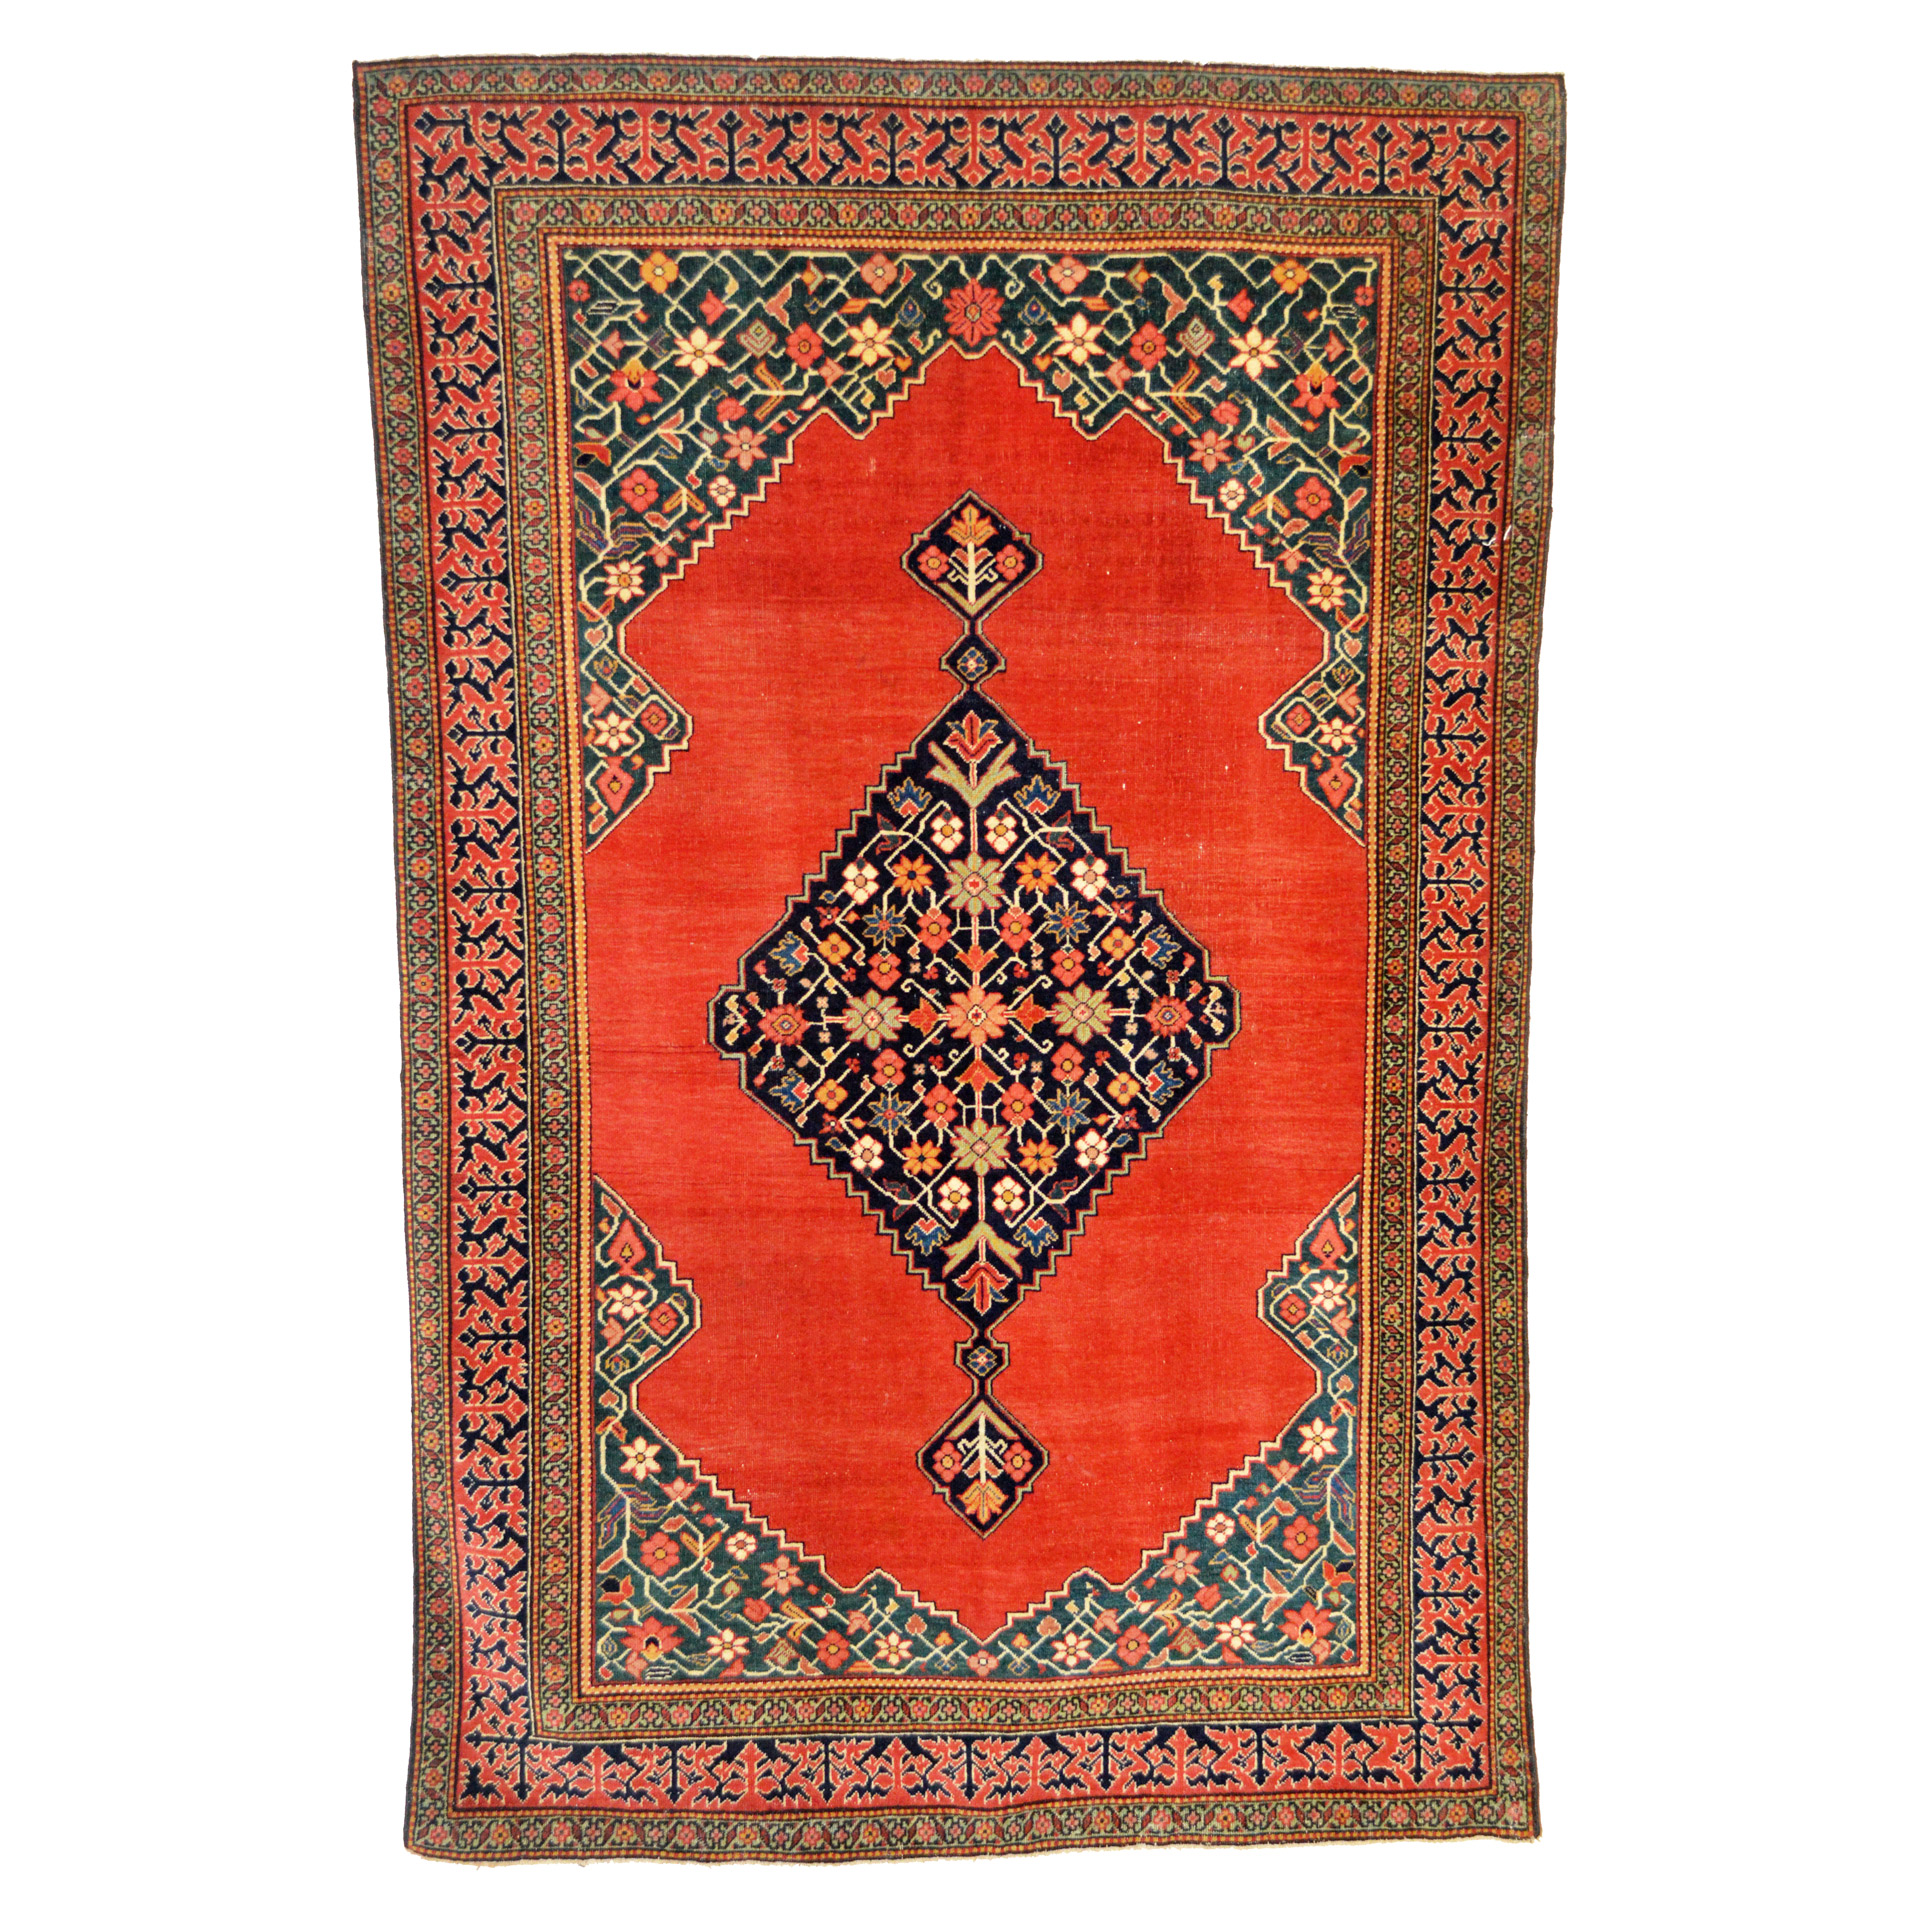 Douglas Stock Gallery is a nationally regarded dealer in antique Oriental rugs that is based in the Boston,MA area but works with a clientele across the United States. Featured here is an antique Persian Fereghan rug with a red open field that is decorated with a navy blue medallion and framed by green corner spandrels and a baby blue and red major border with grass green guard borders, central Persia, circa 1895. Douglas Stock Gallery, antique Oriental rugs Boston, Cambridge, GBelmont, Lexington, Concord, Weston, Wellesley, Natick,MA area.